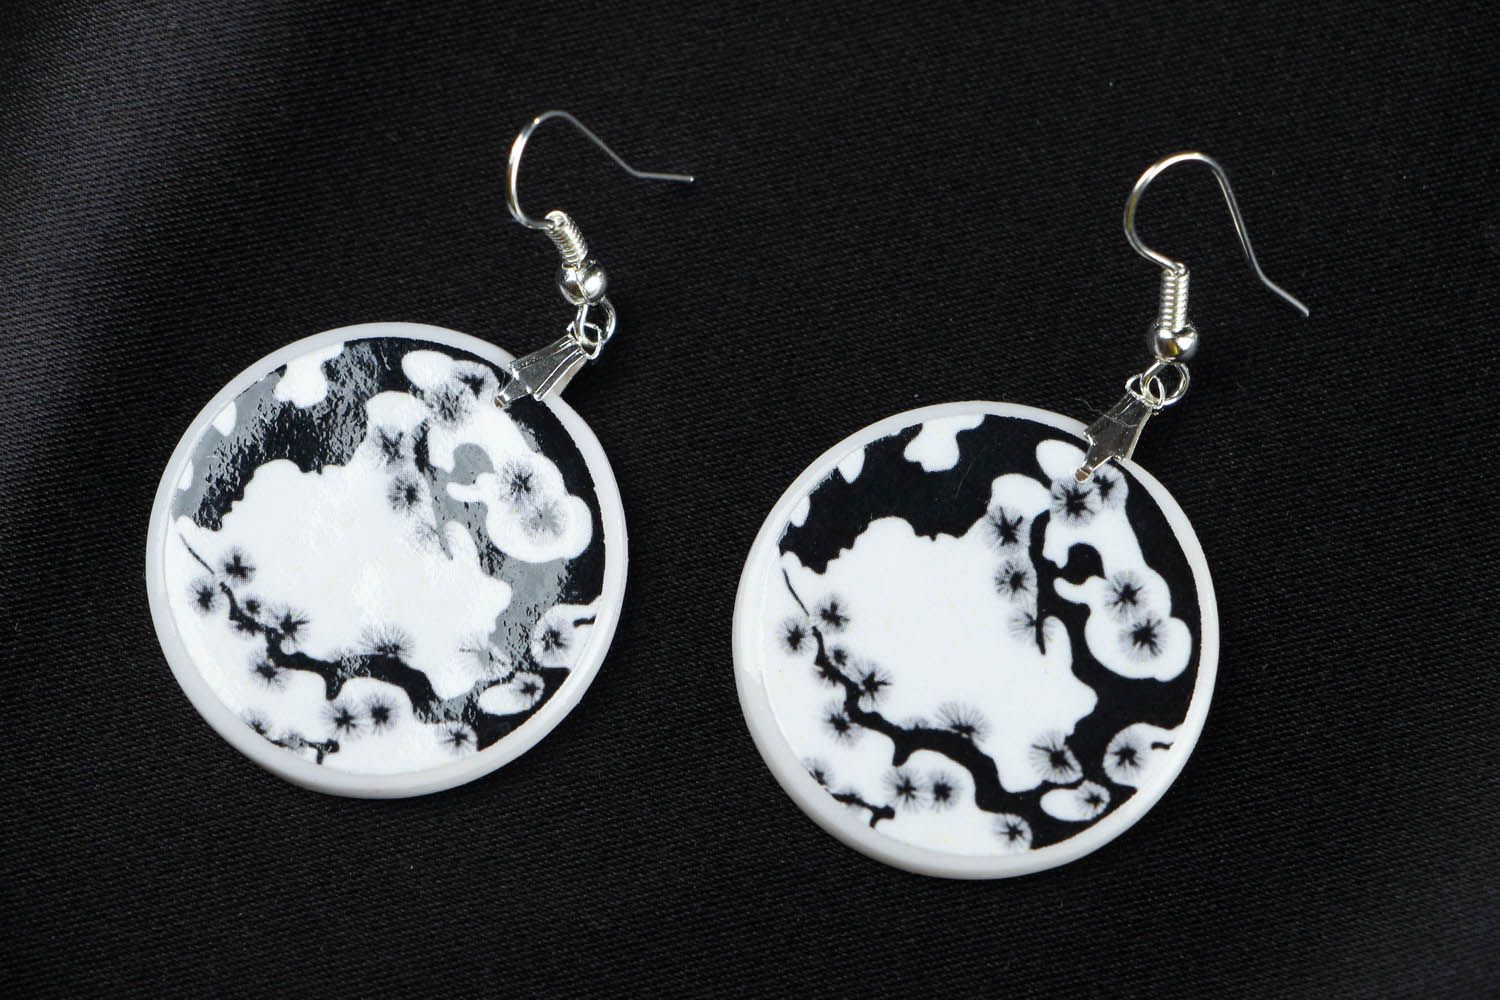 Earrings made using decoupage technique photo 1